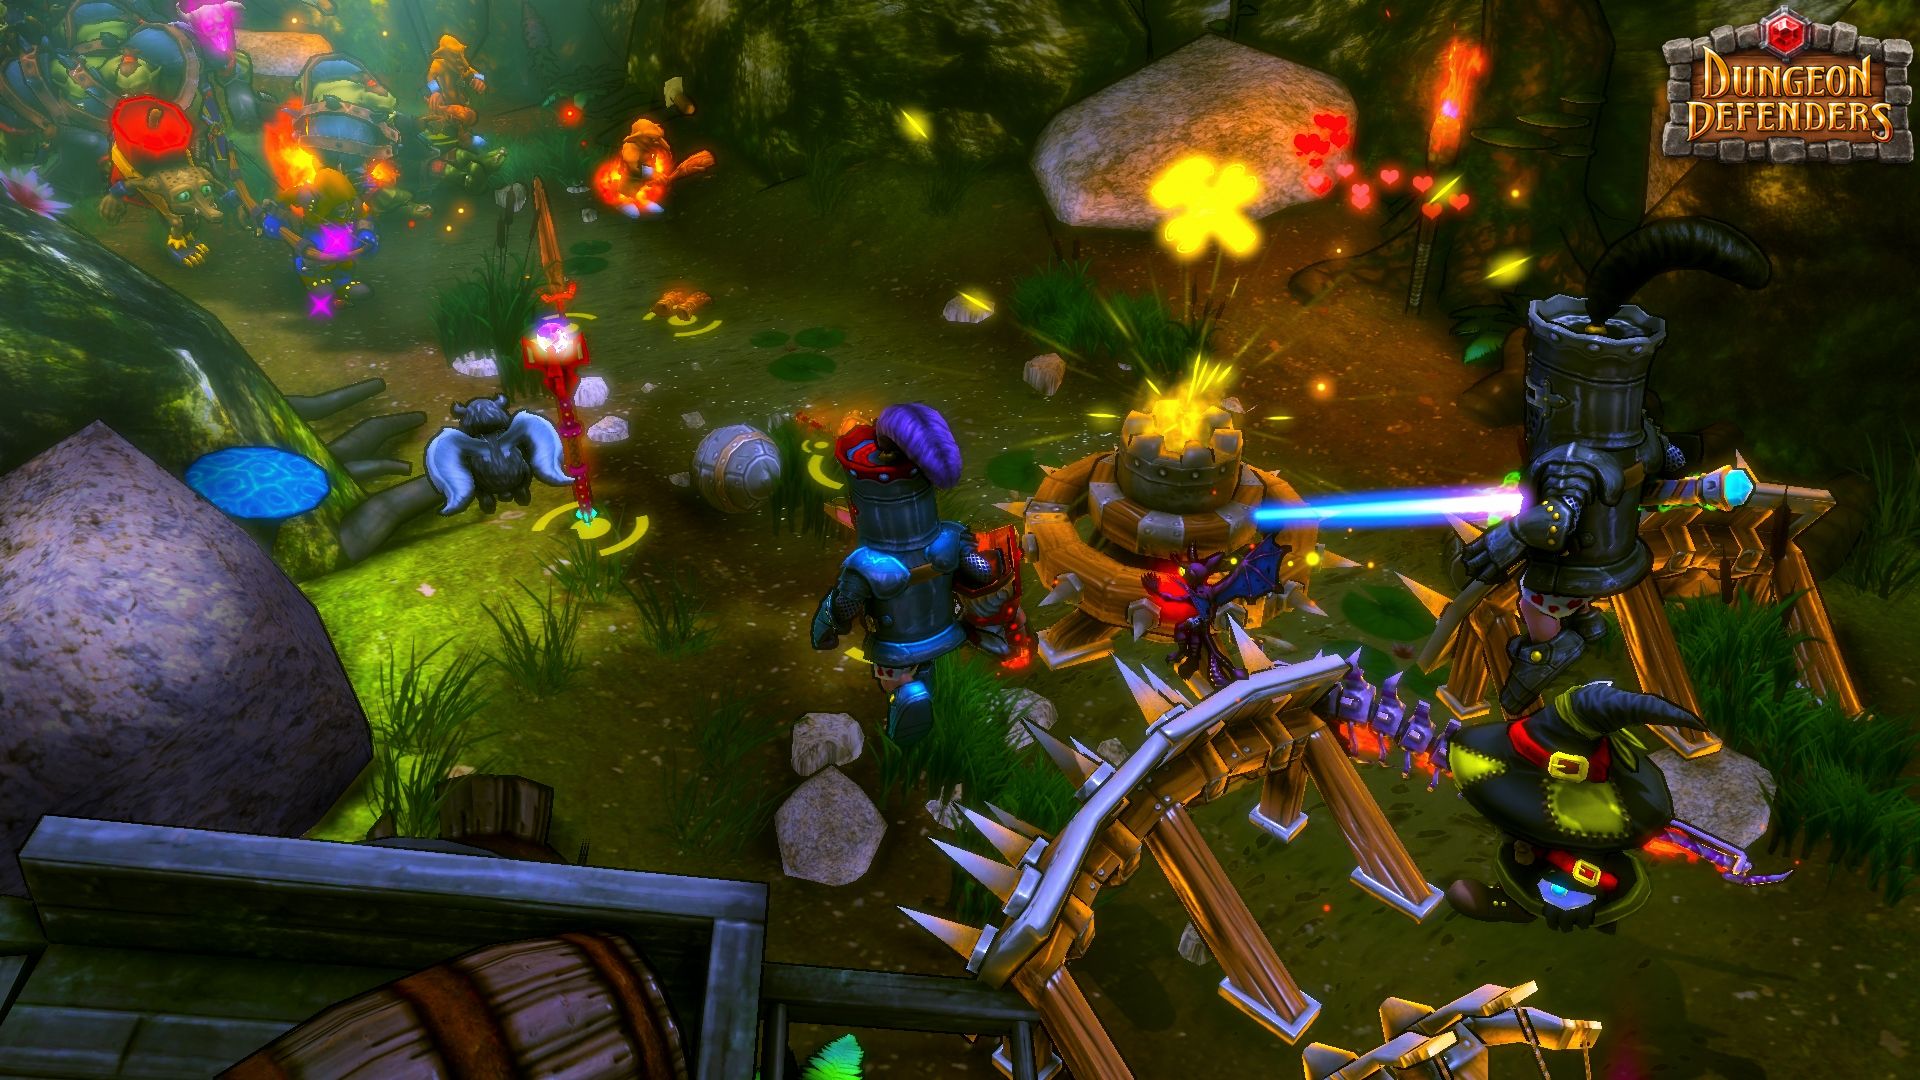 Amazing Dungeon Defenders Pictures & Backgrounds